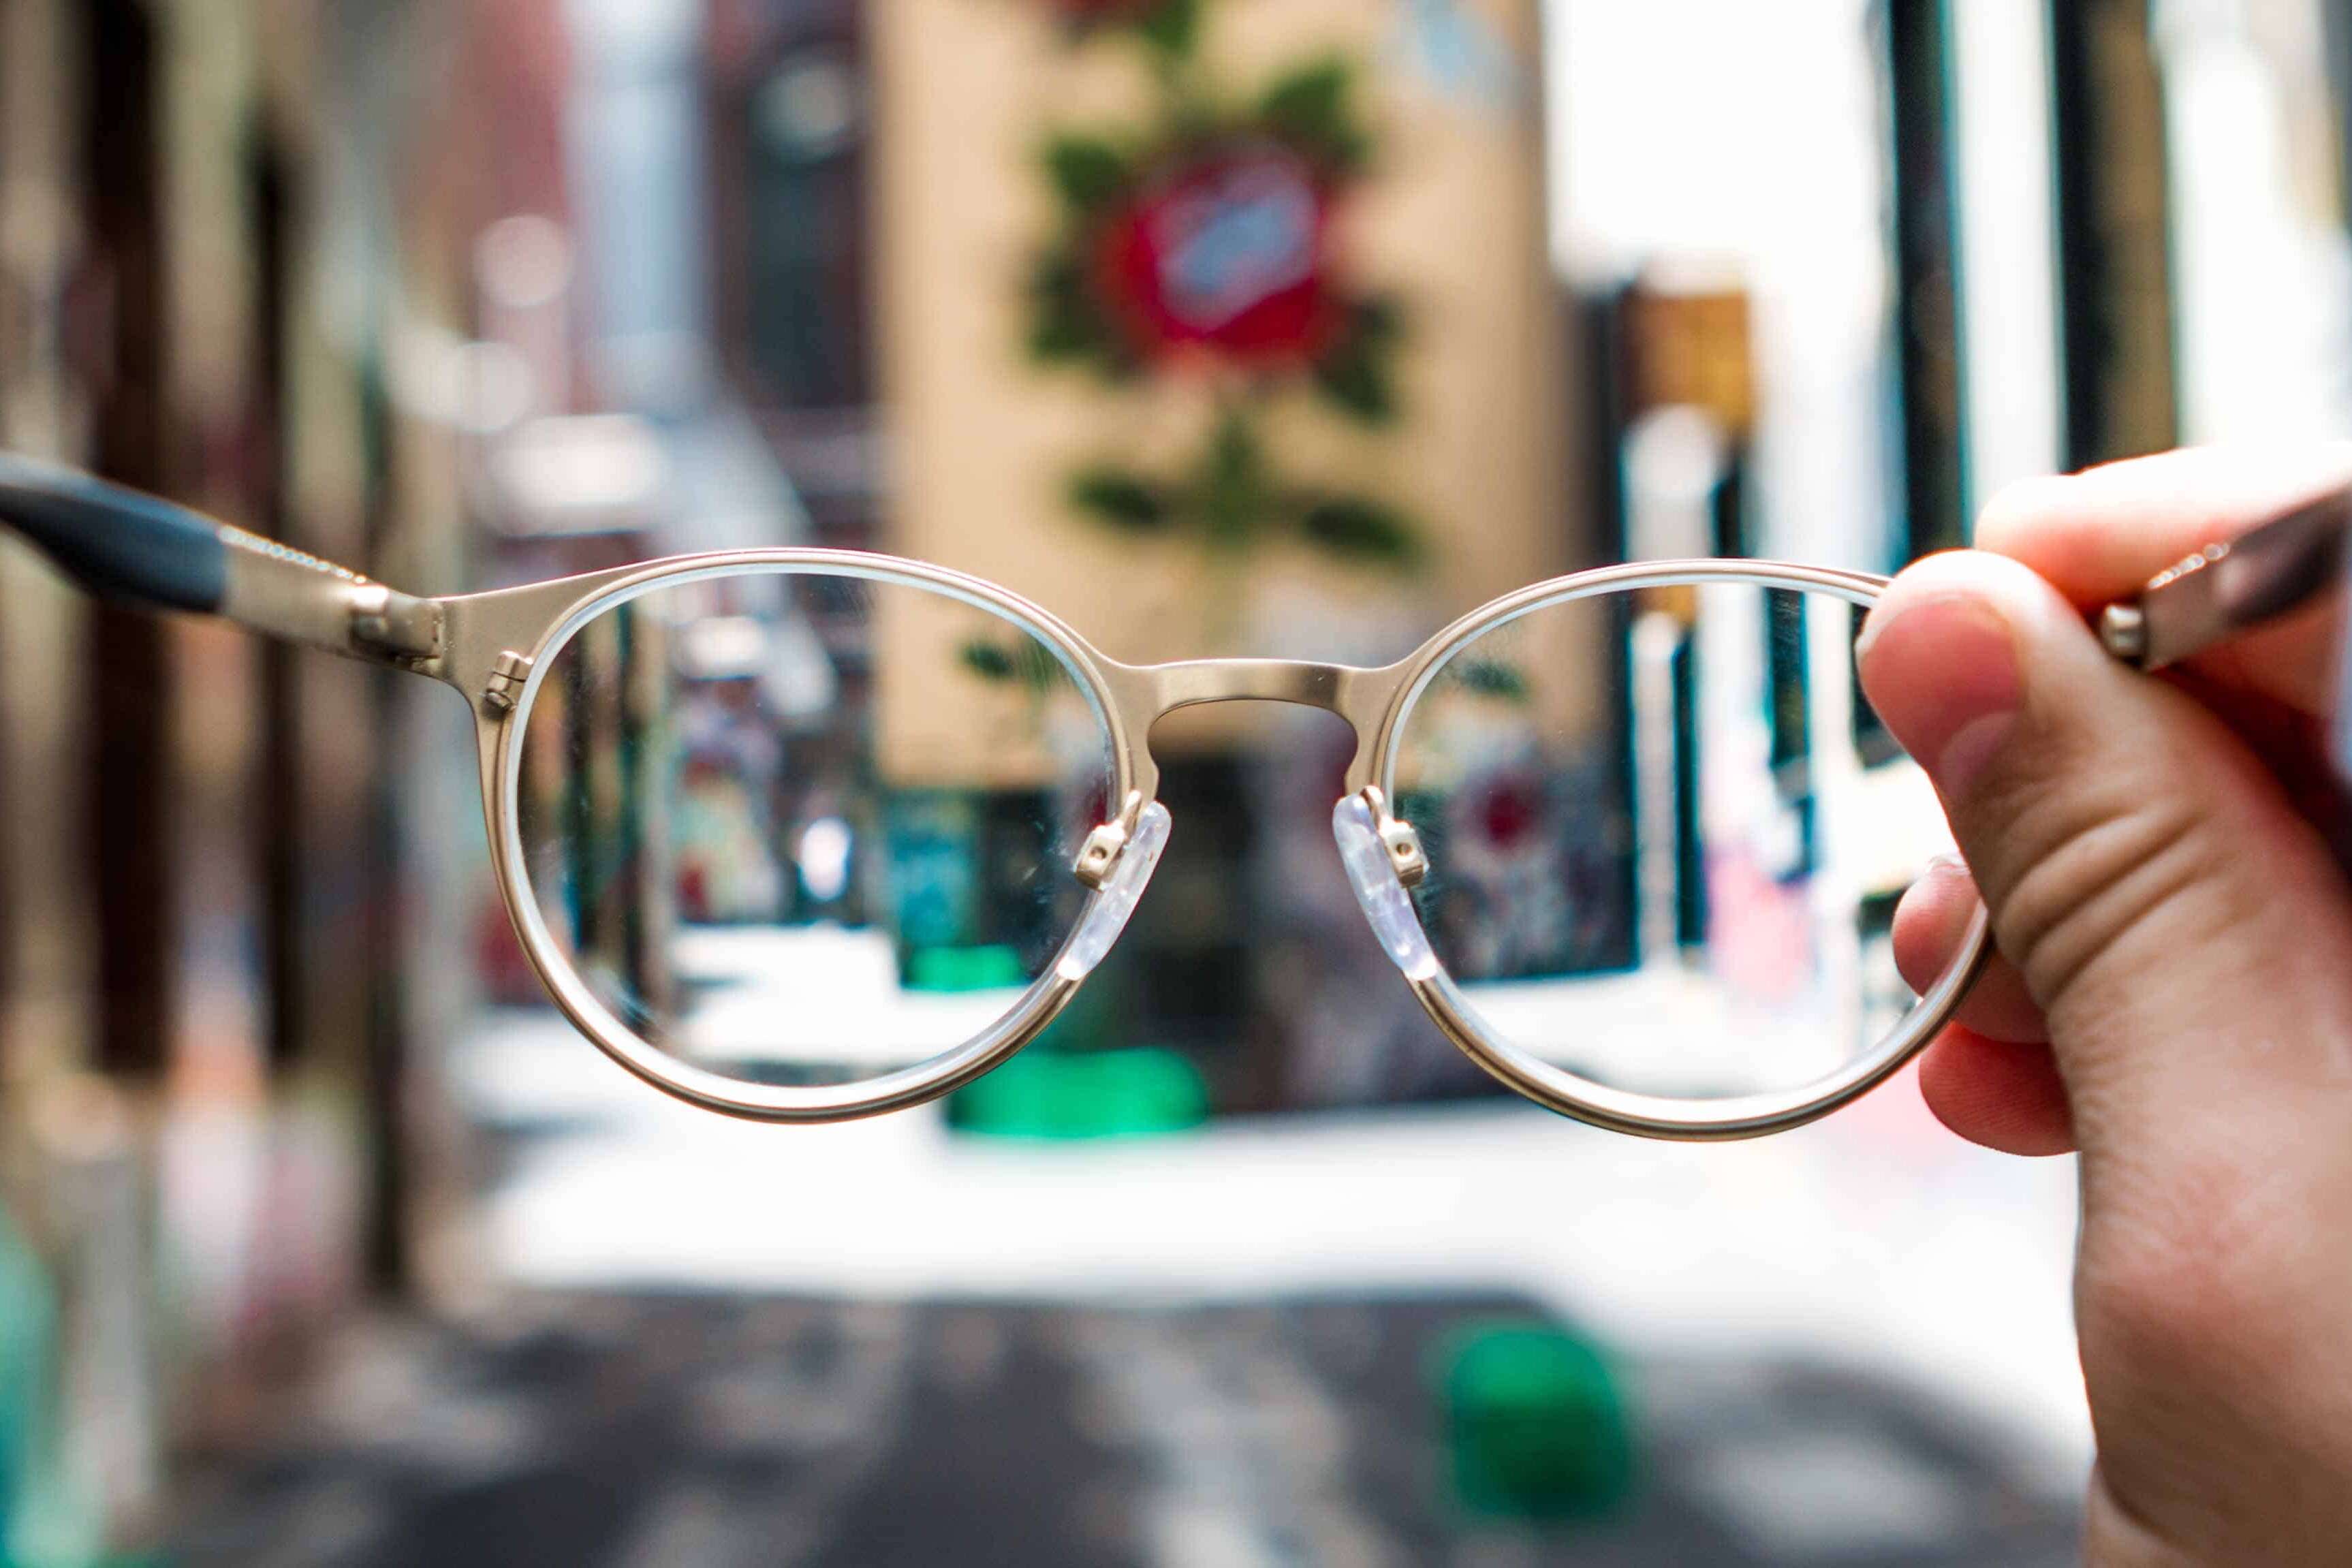 Person holding glasses with blurry street behind them